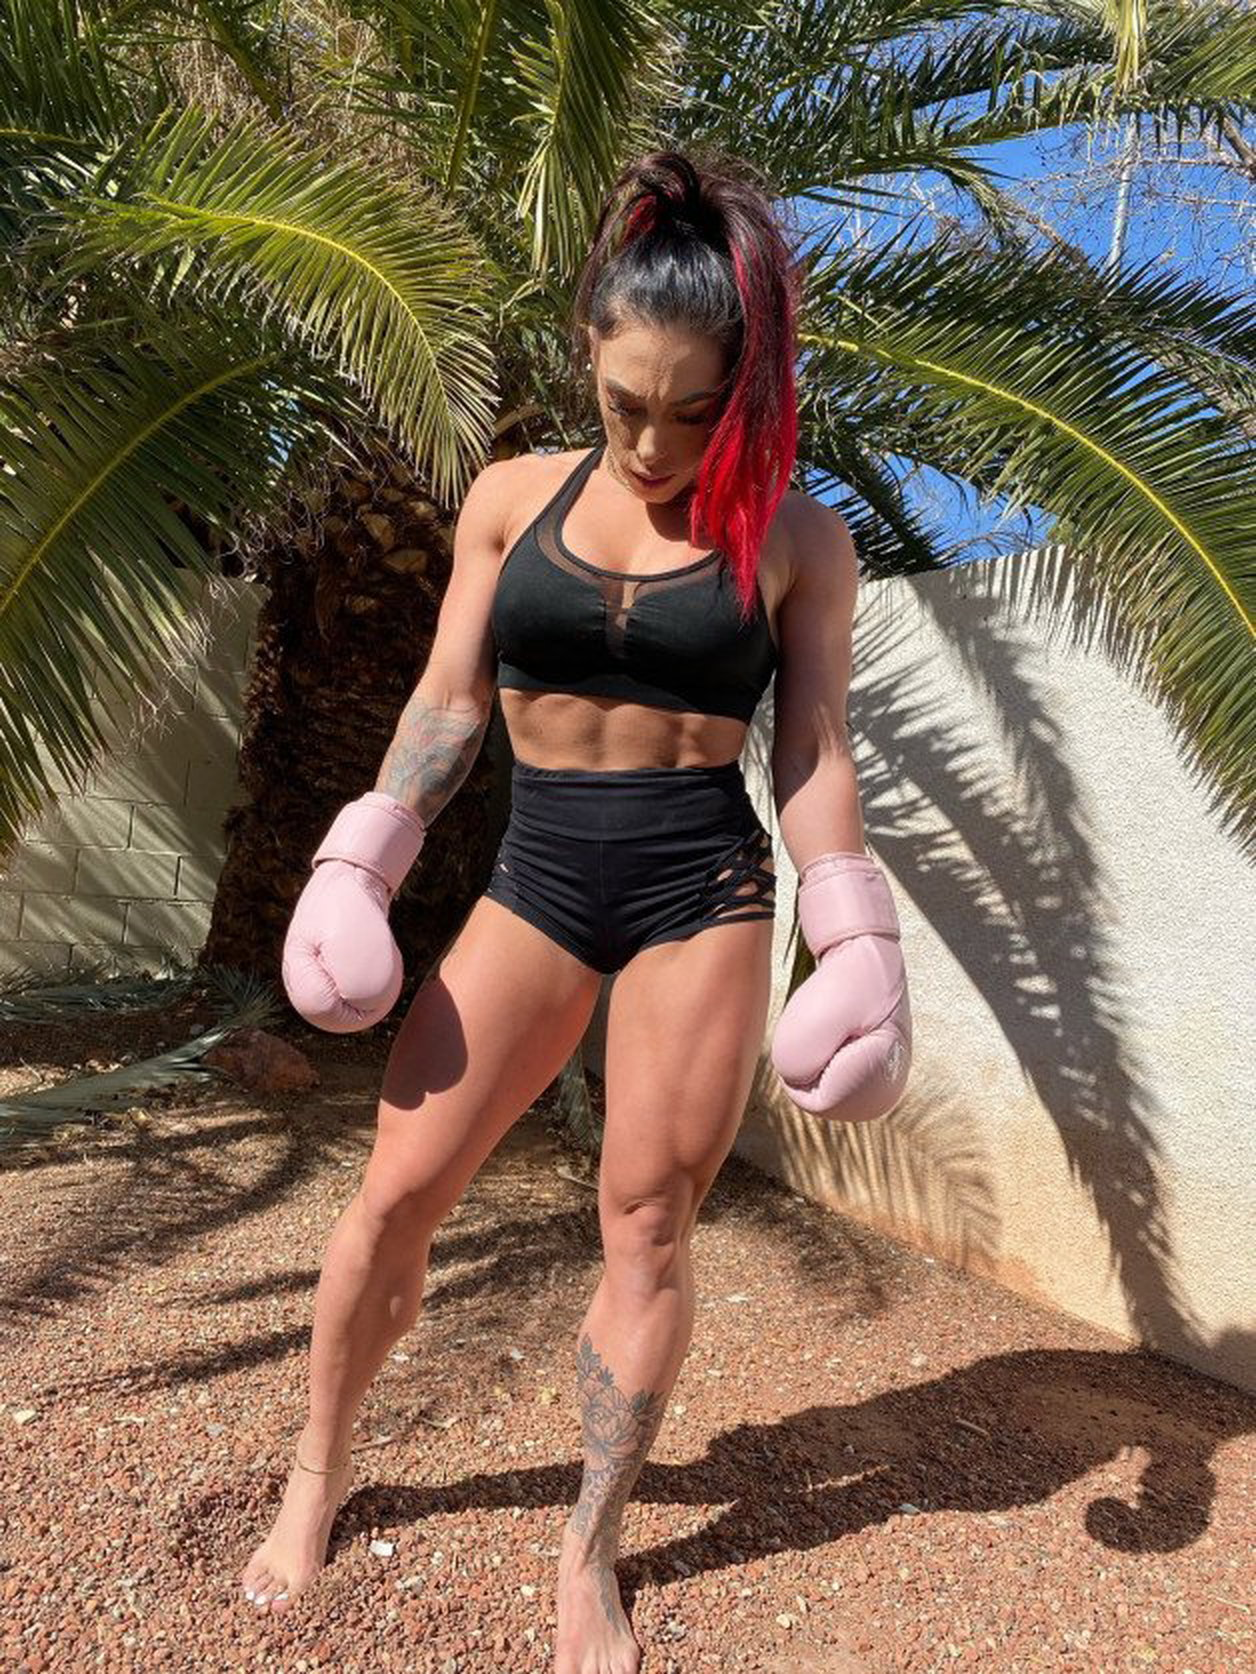 Watch the Photo by Ruinedcarpet with the username @Ruinedcarpet, posted on August 1, 2022. The post is about the topic Gym Fitness Girls. and the text says 'Kayla Rossi.

#KaylaRossi #Hot #Fit #Cute #ProWrestler #Strong #Fitness #Amazon #DyedHair #Possing #Outdoors #Backyard #Hottie #FitGirl #Cutie #GymBody #FitnessGirl #DyedHaired #Ponytail #Garden #Cuteness #Shorts #Sportswear #Abs #StrongLegs #Thighs..'